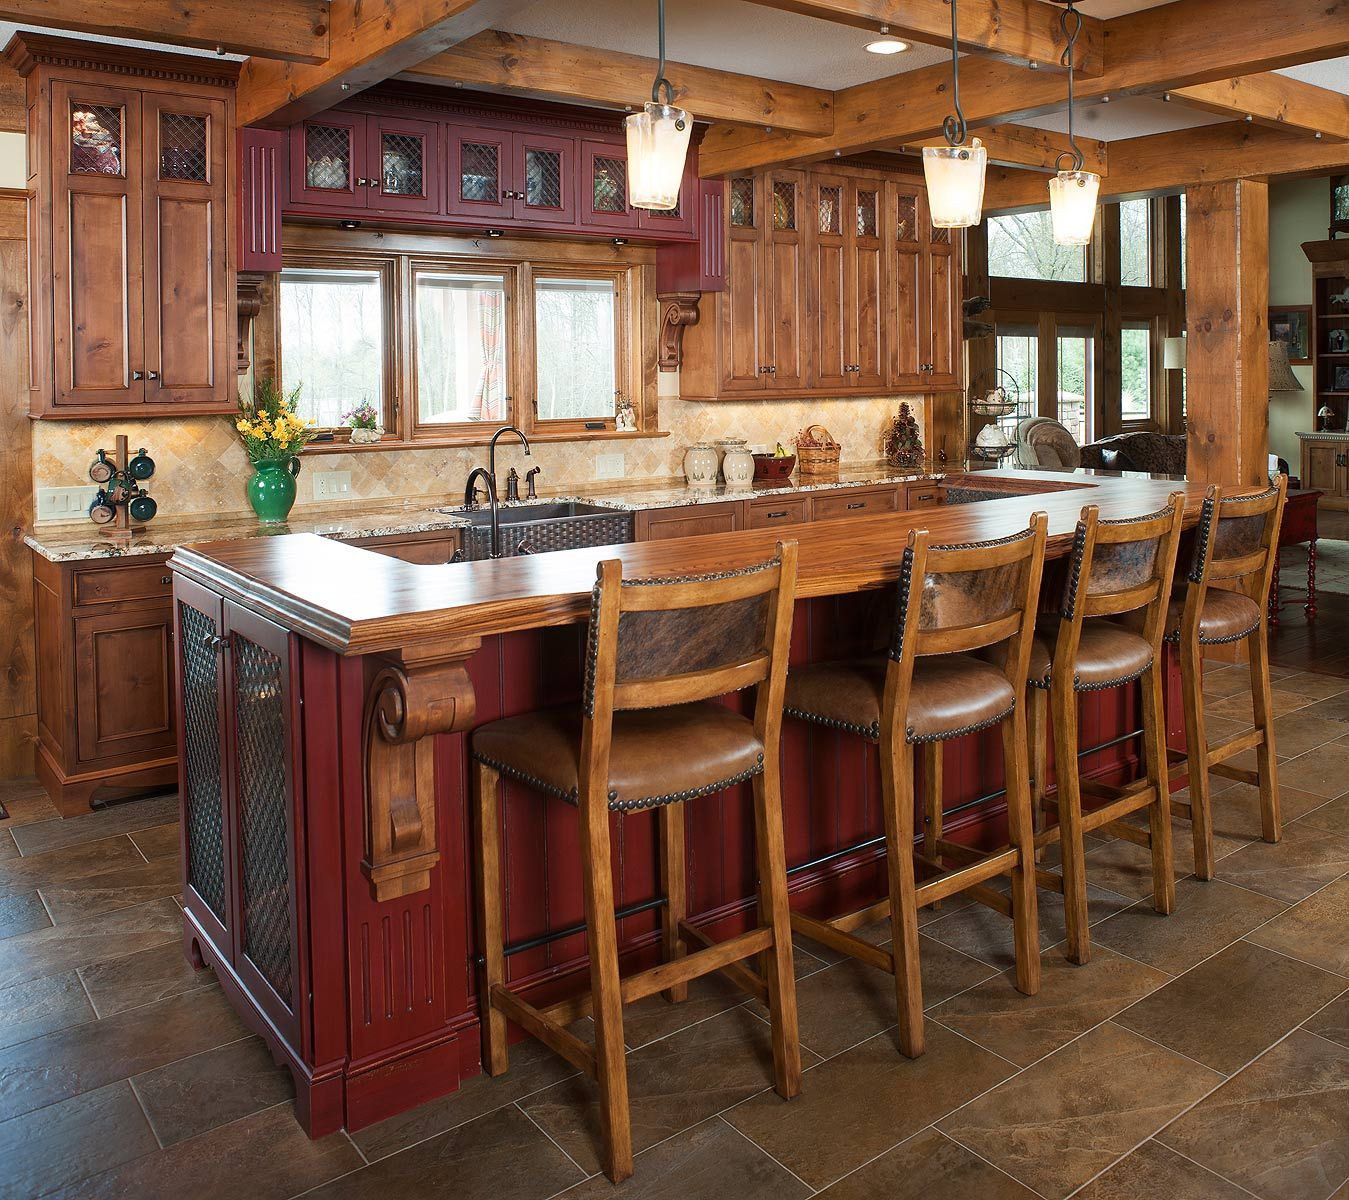 Small Rustic Kitchen Islands
 Rustic kitchen and island in 2019